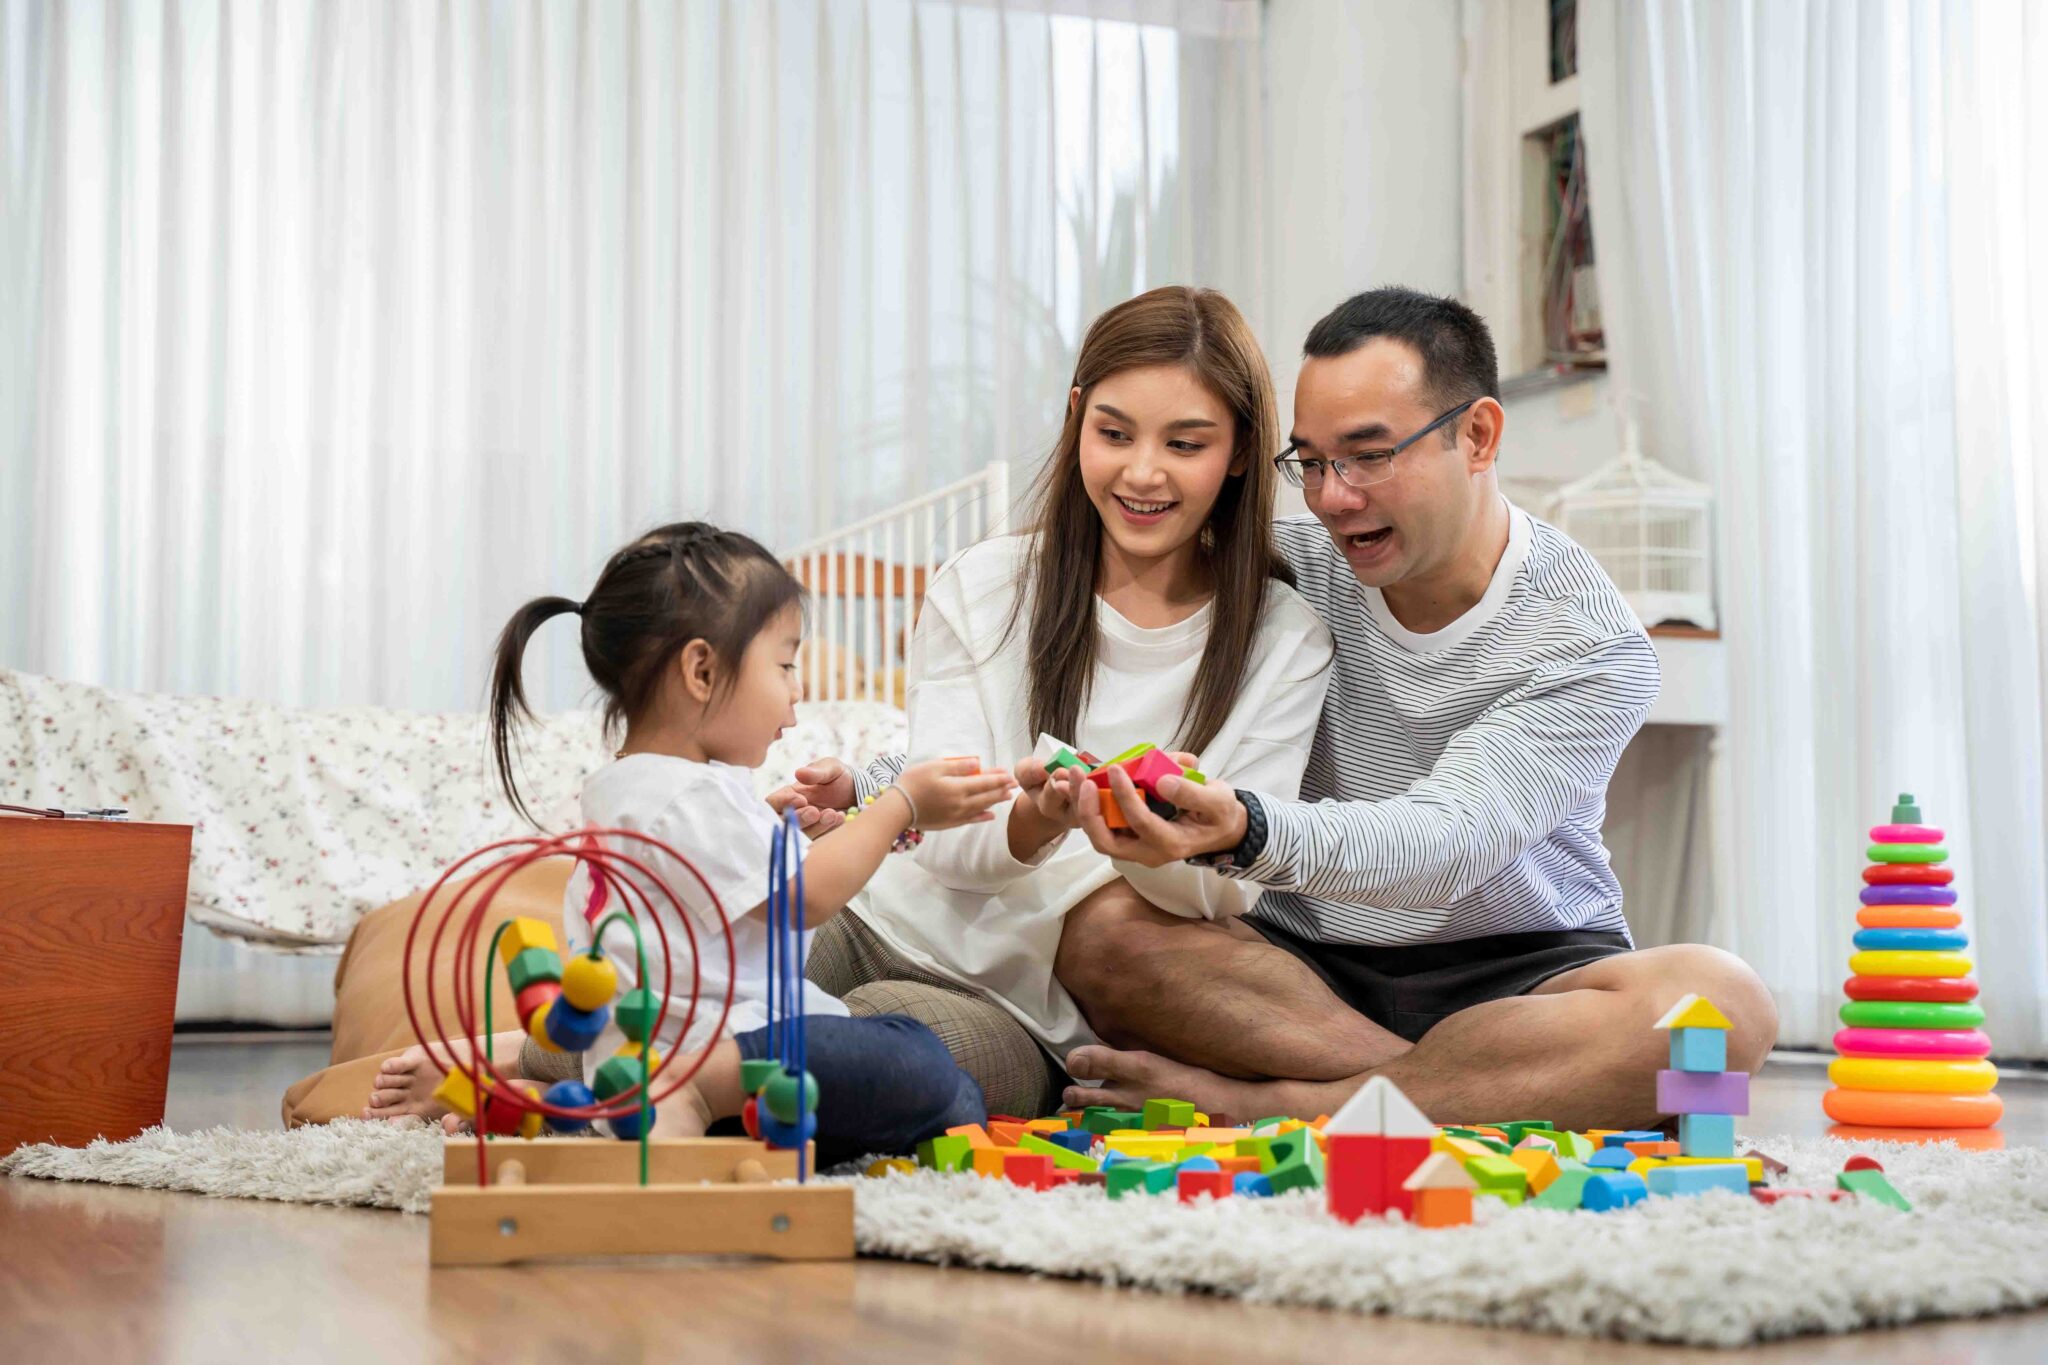 Happy young father and mother and a little daughter playing with Toy wooden blocks, sitting on the floor in living room, family, parenthood and people concept with Developmental toys